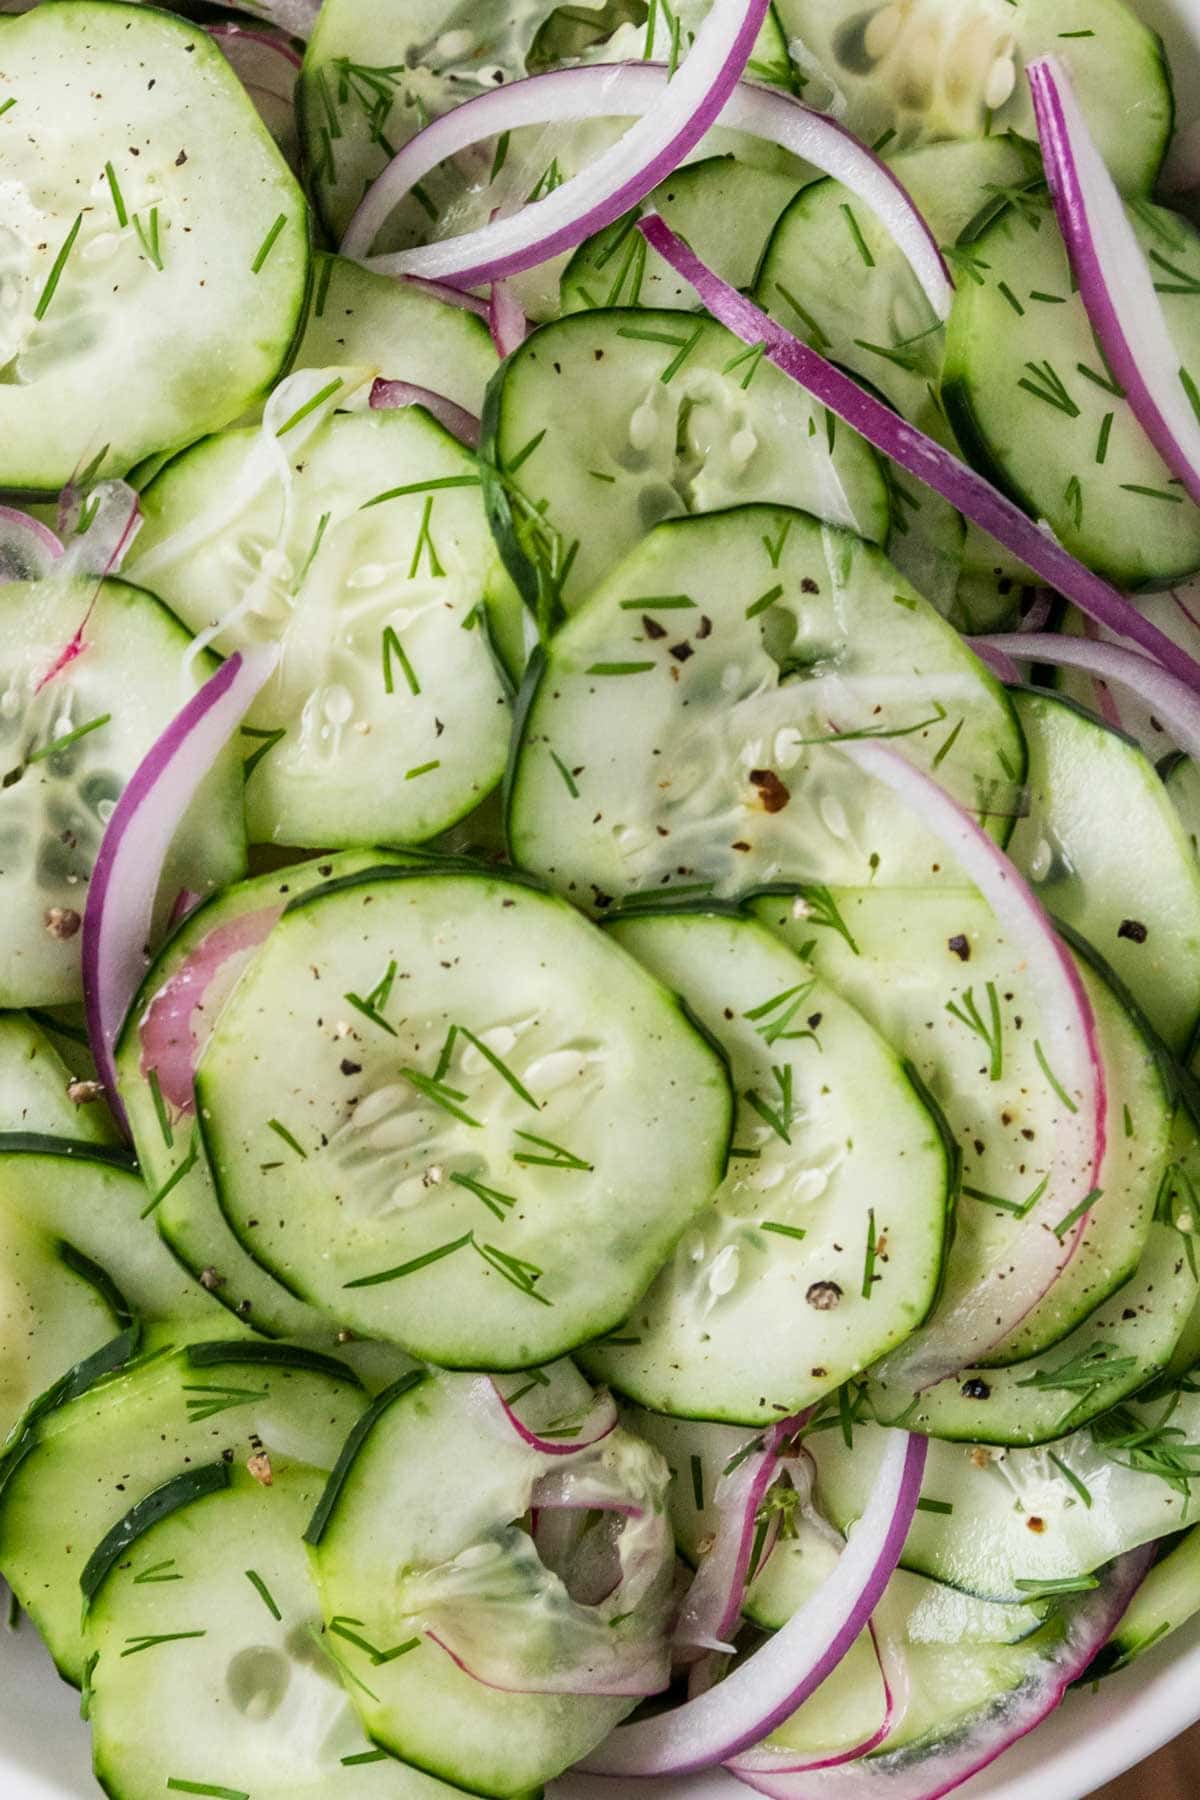 Close-up view of cucumber slices and red onion tossed in a dill dressing.